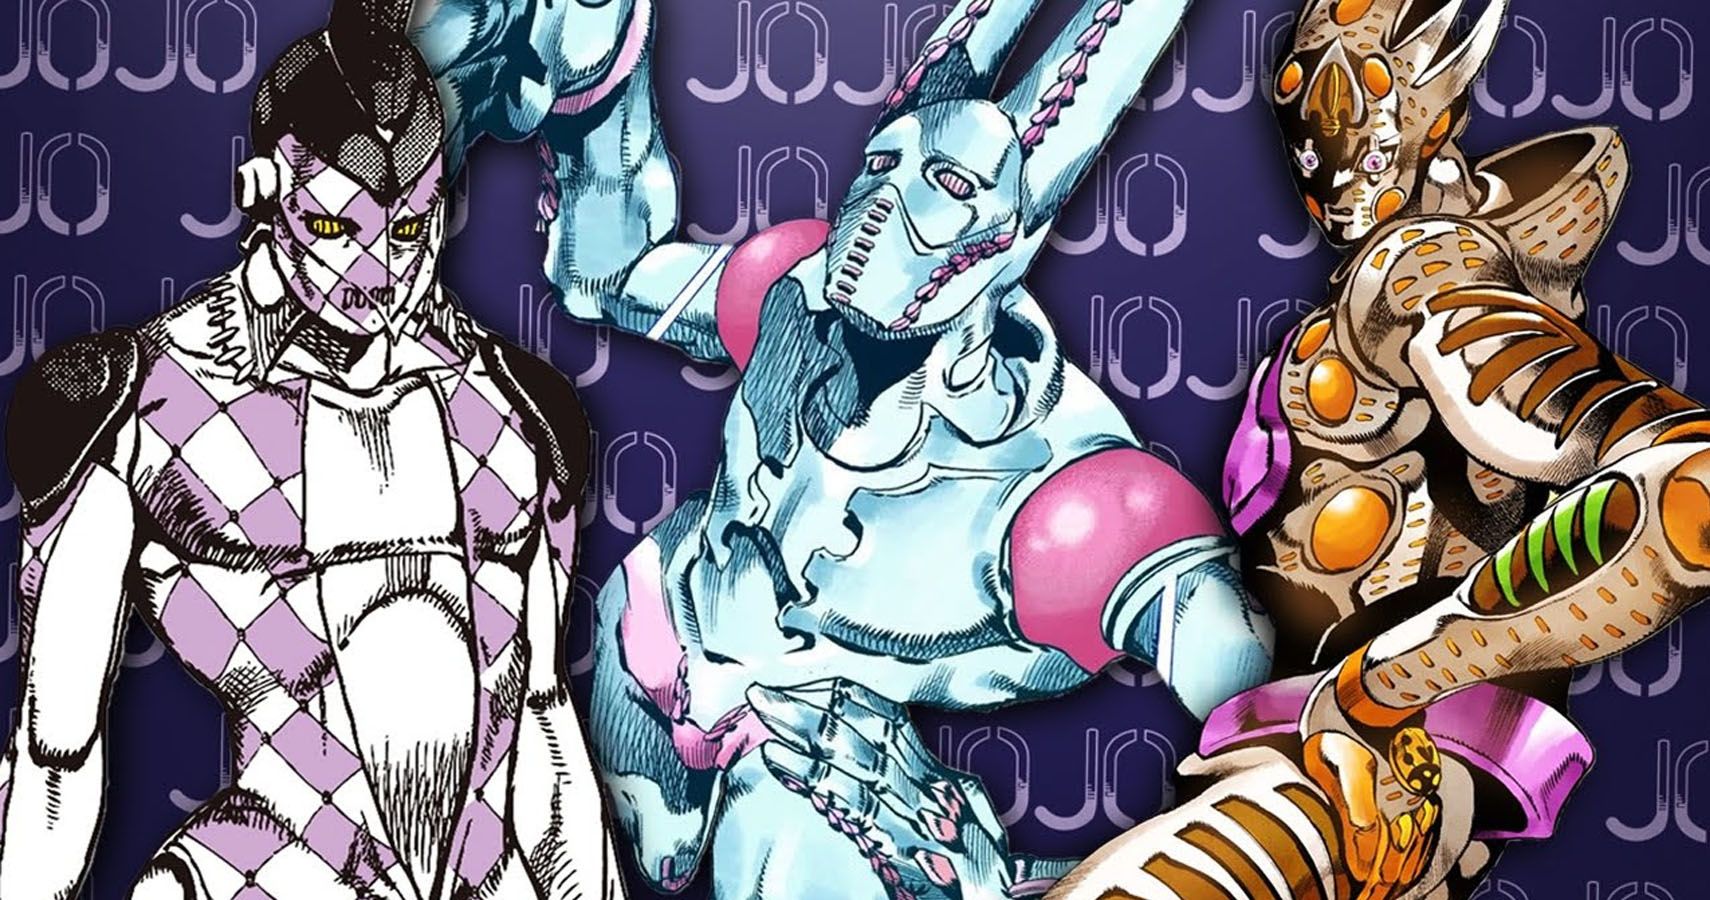 Which Stand in JoJo's Bizarre Adventure is the best designed and